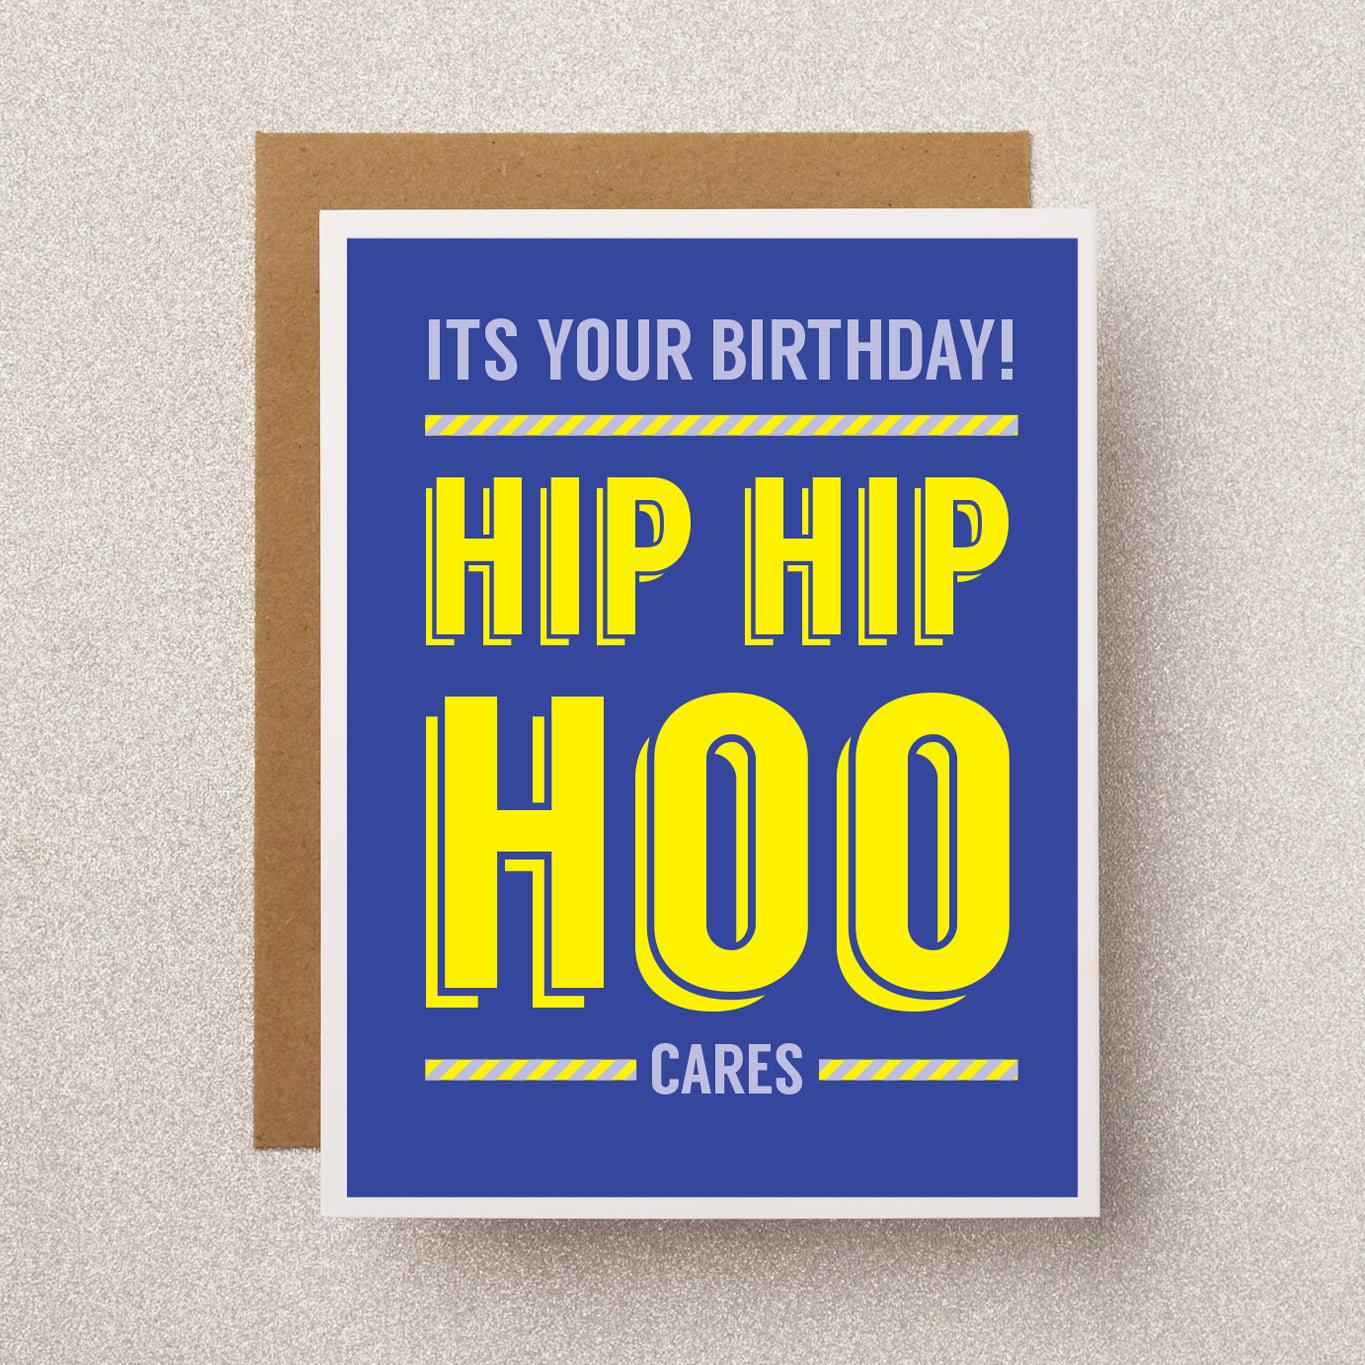 Sarcastic and funny birthday greeting card that reads "Its your birthday! Hip Hip Hoo Cares"